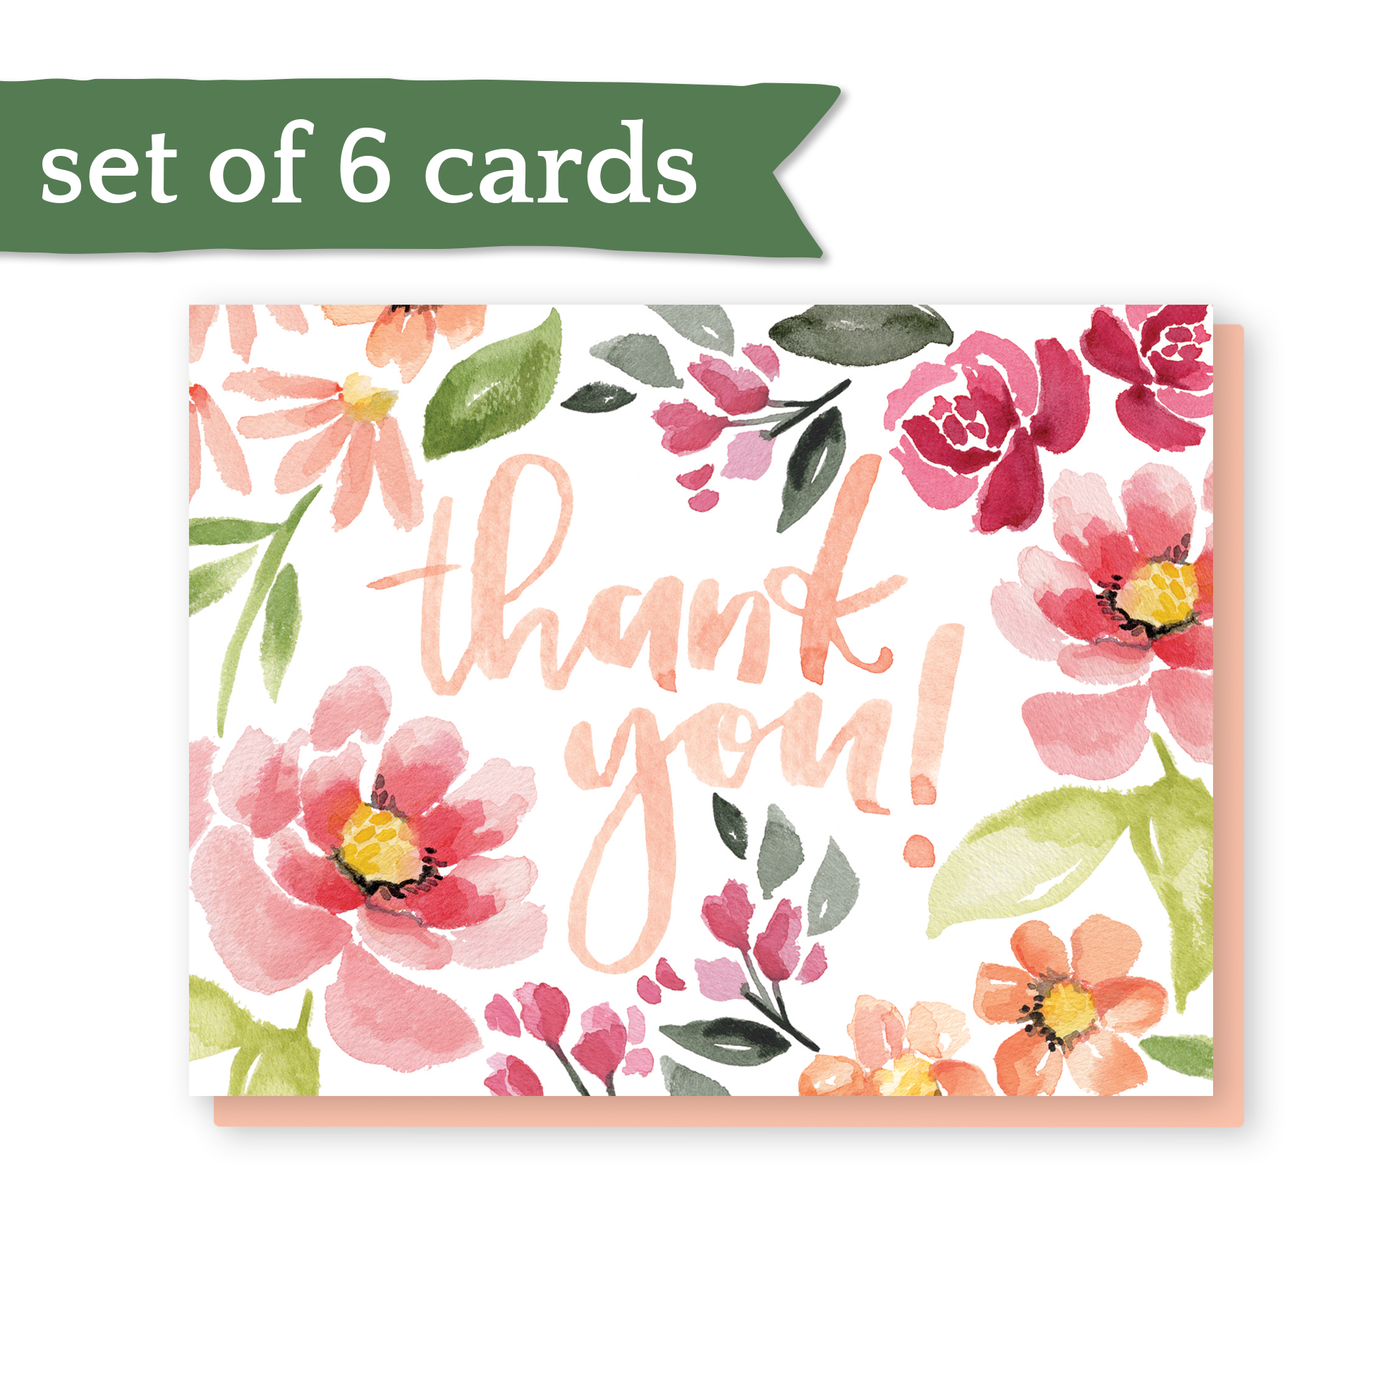 set of 6 thank you! cards in Mallory's floral